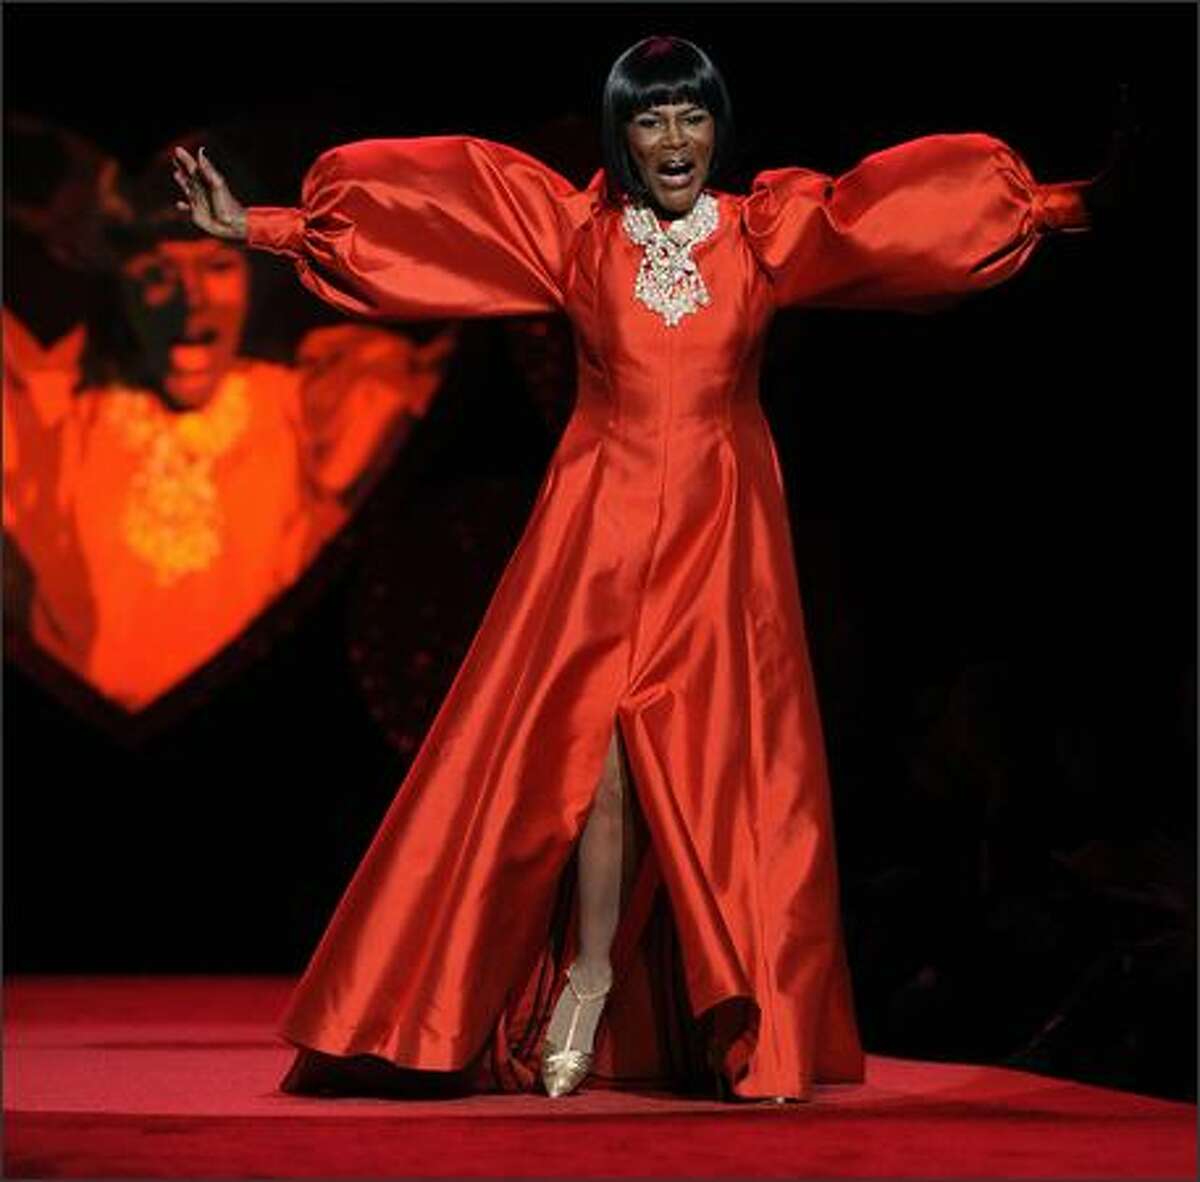 Actress Cicely Tyson models a b. michael design during the Heart Truth Red Dress Collection 2009 Fashion Show at the Mercedes Benz Fashion Week in New York.